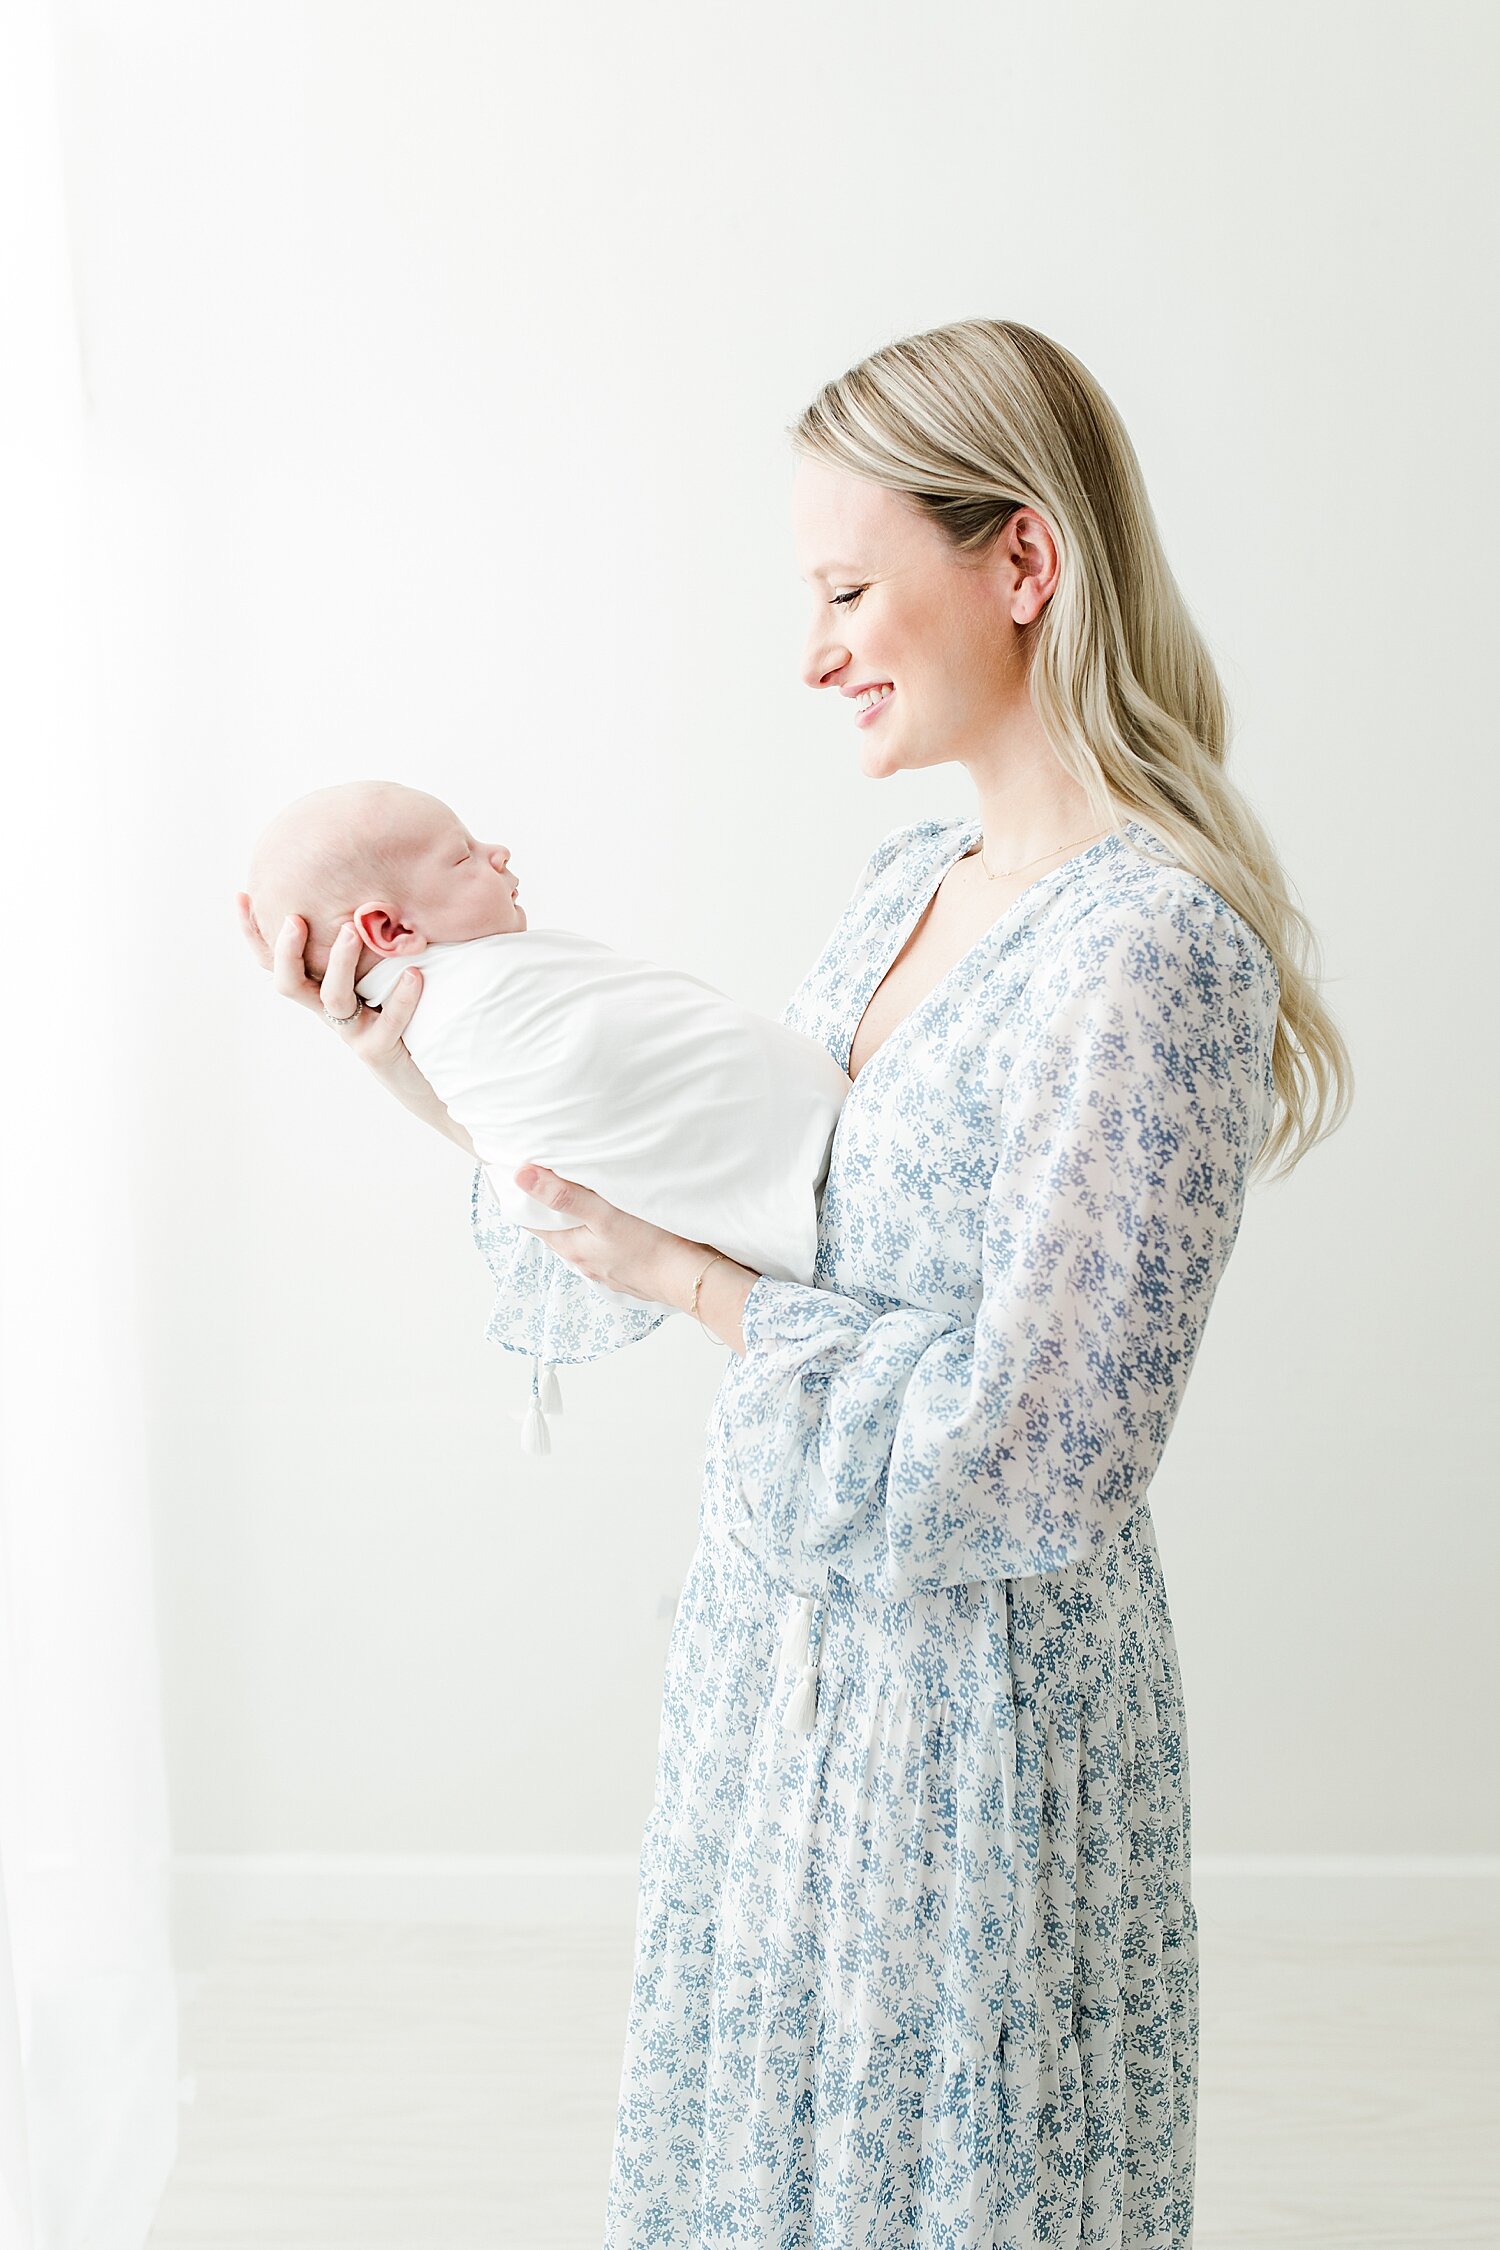 Beautiful photo of first-time mom with baby boy at a newborn studio in Connecticut. Photos by Kristin Wood Photography.